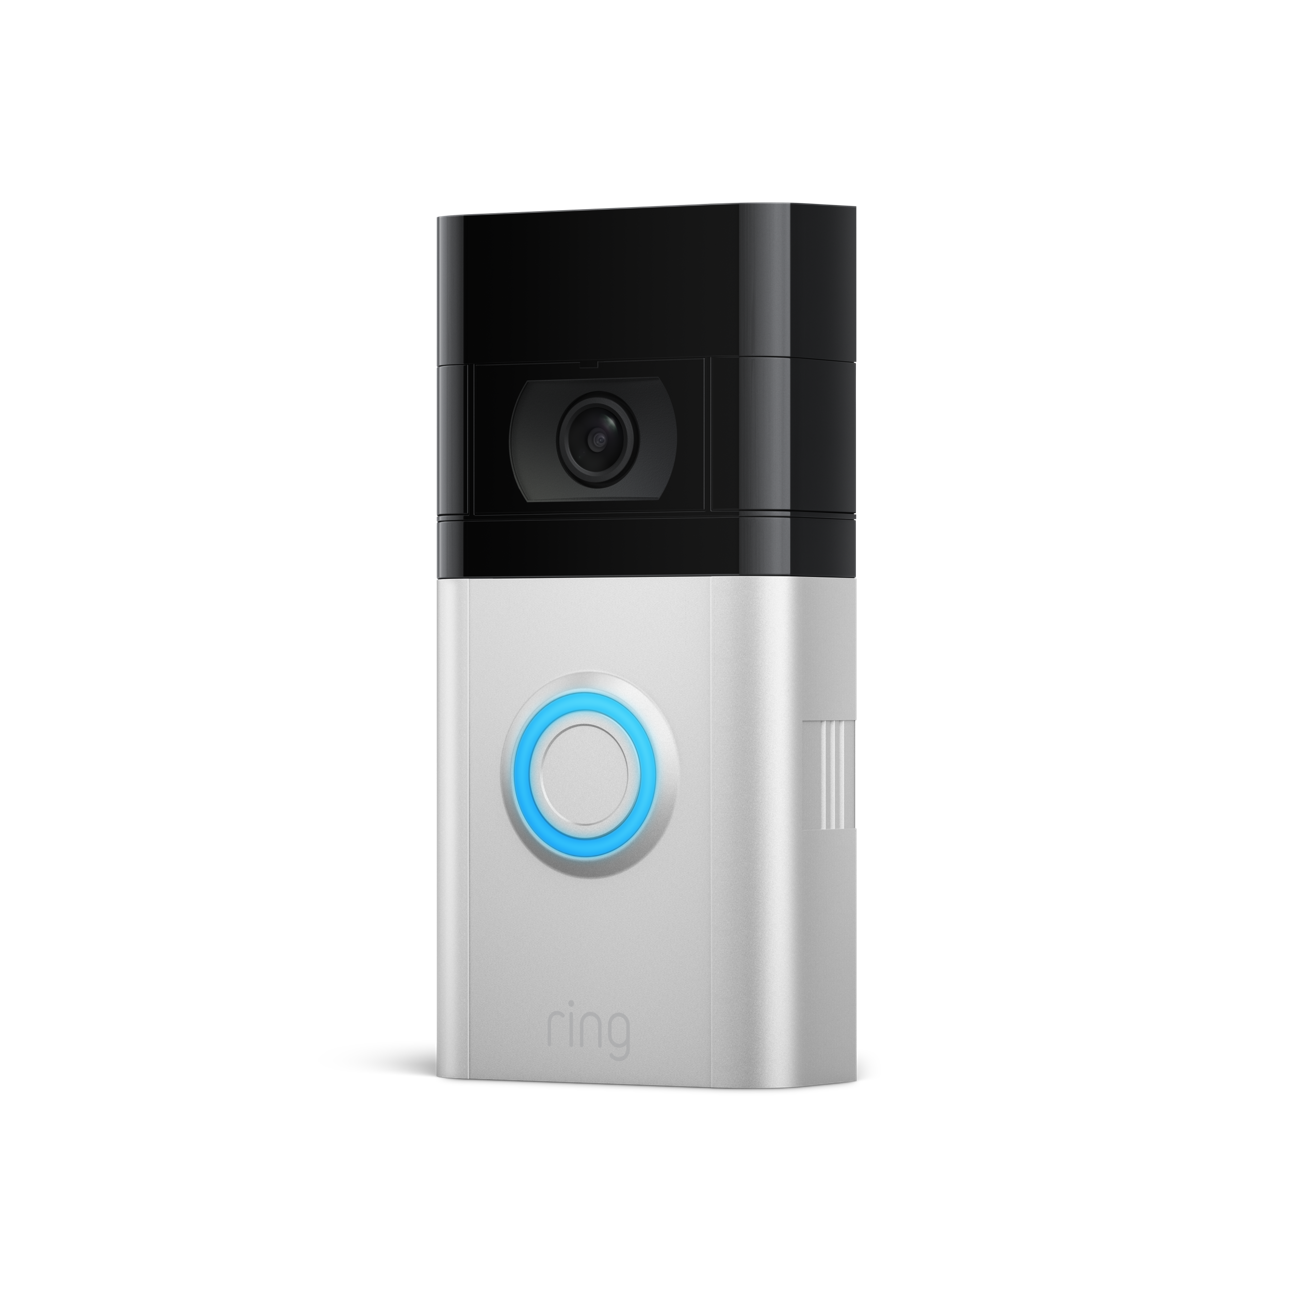 Ring Smart Video Doorbell 3 Plus with Built-in Wi-Fi & Camera - Refurbished Excellent